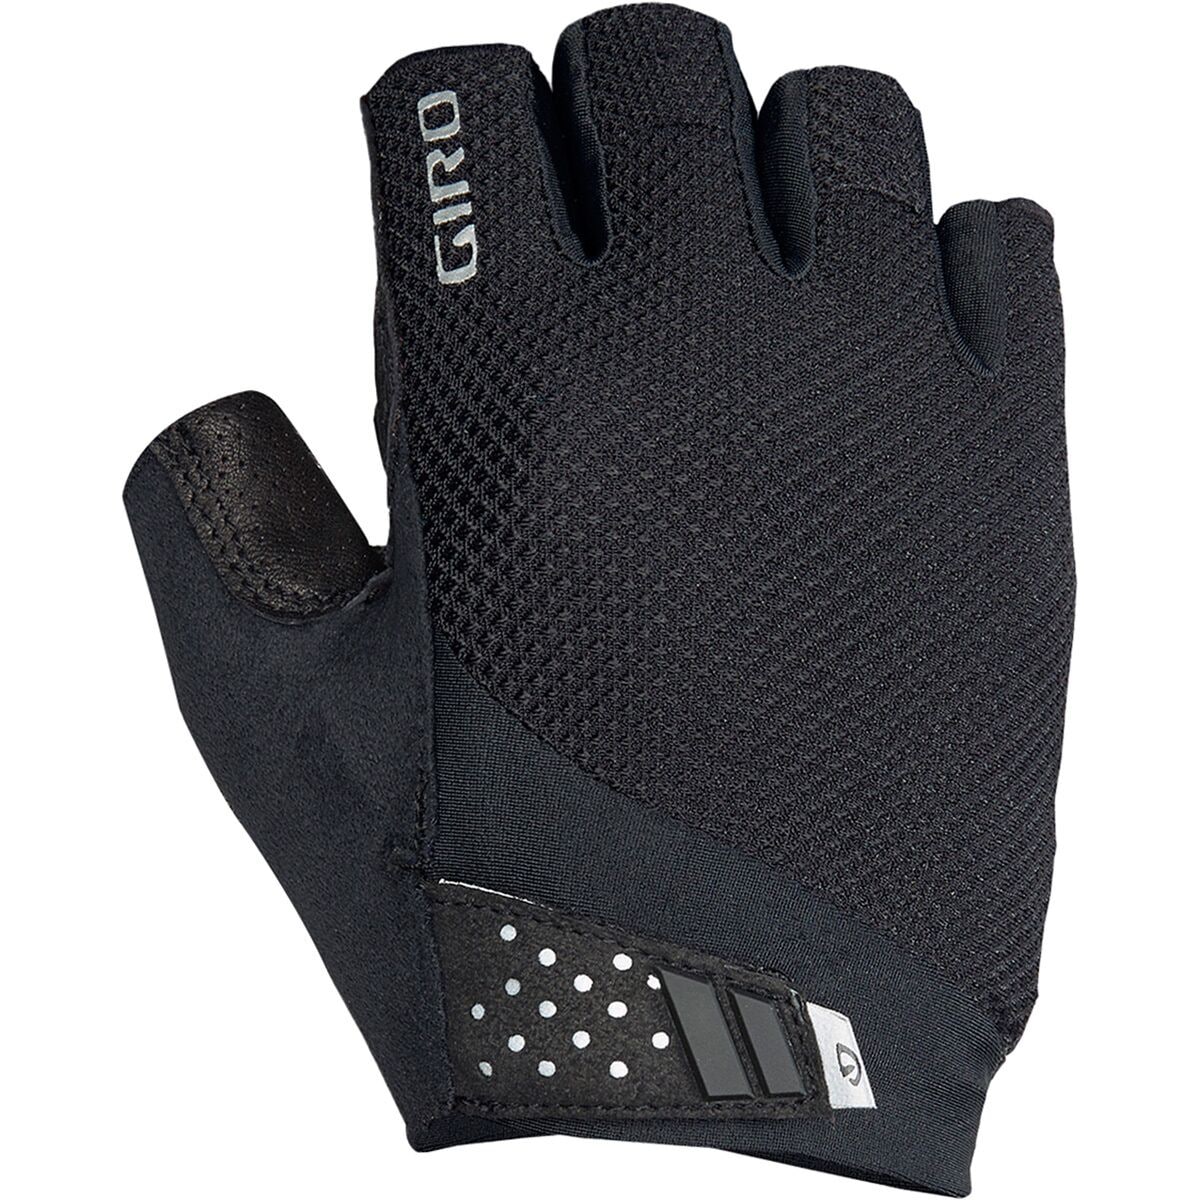 Giro Monaco II Gel Size Large Cycling Gloves New with Tags 